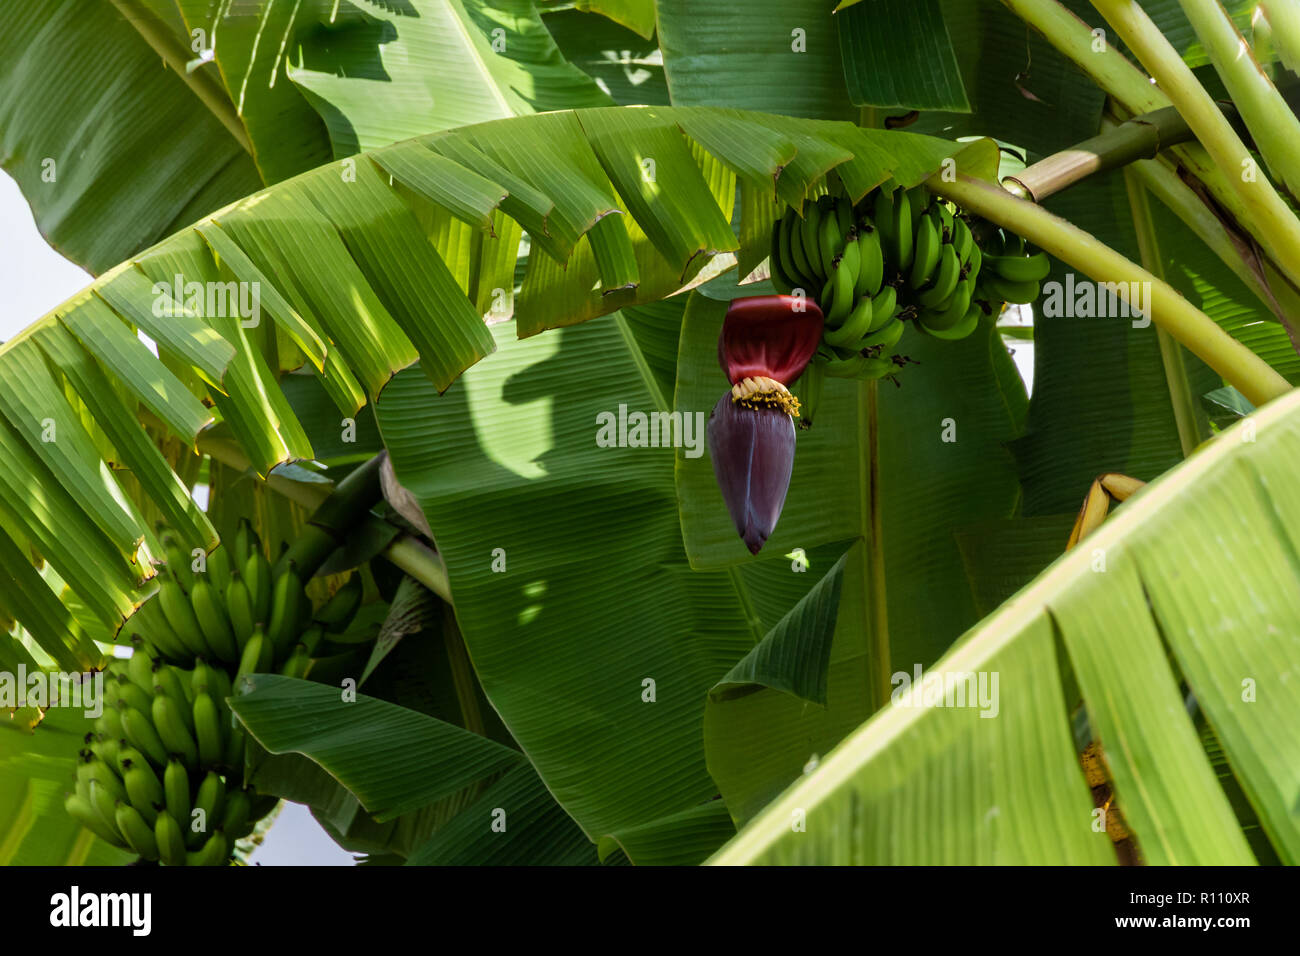 Green banana bunch with colorful flower attached, part of a Hawaiian plantation on the big island. Palm fronds, additional bananas in the background. Stock Photo